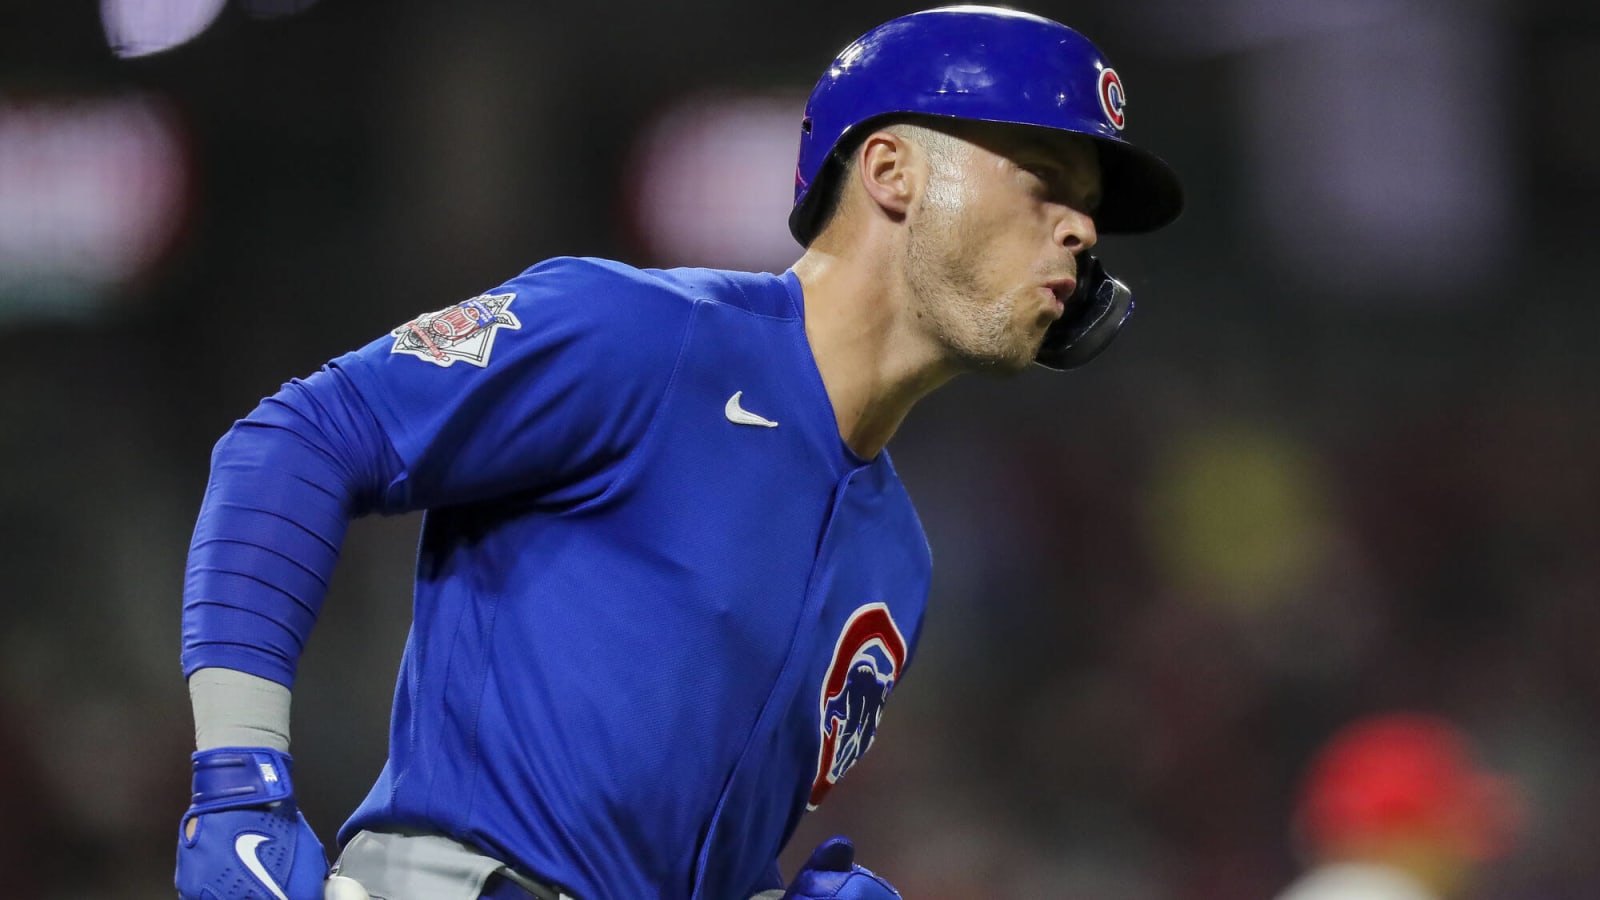 Cubs' Nico Hoerner impresses in his first start of season